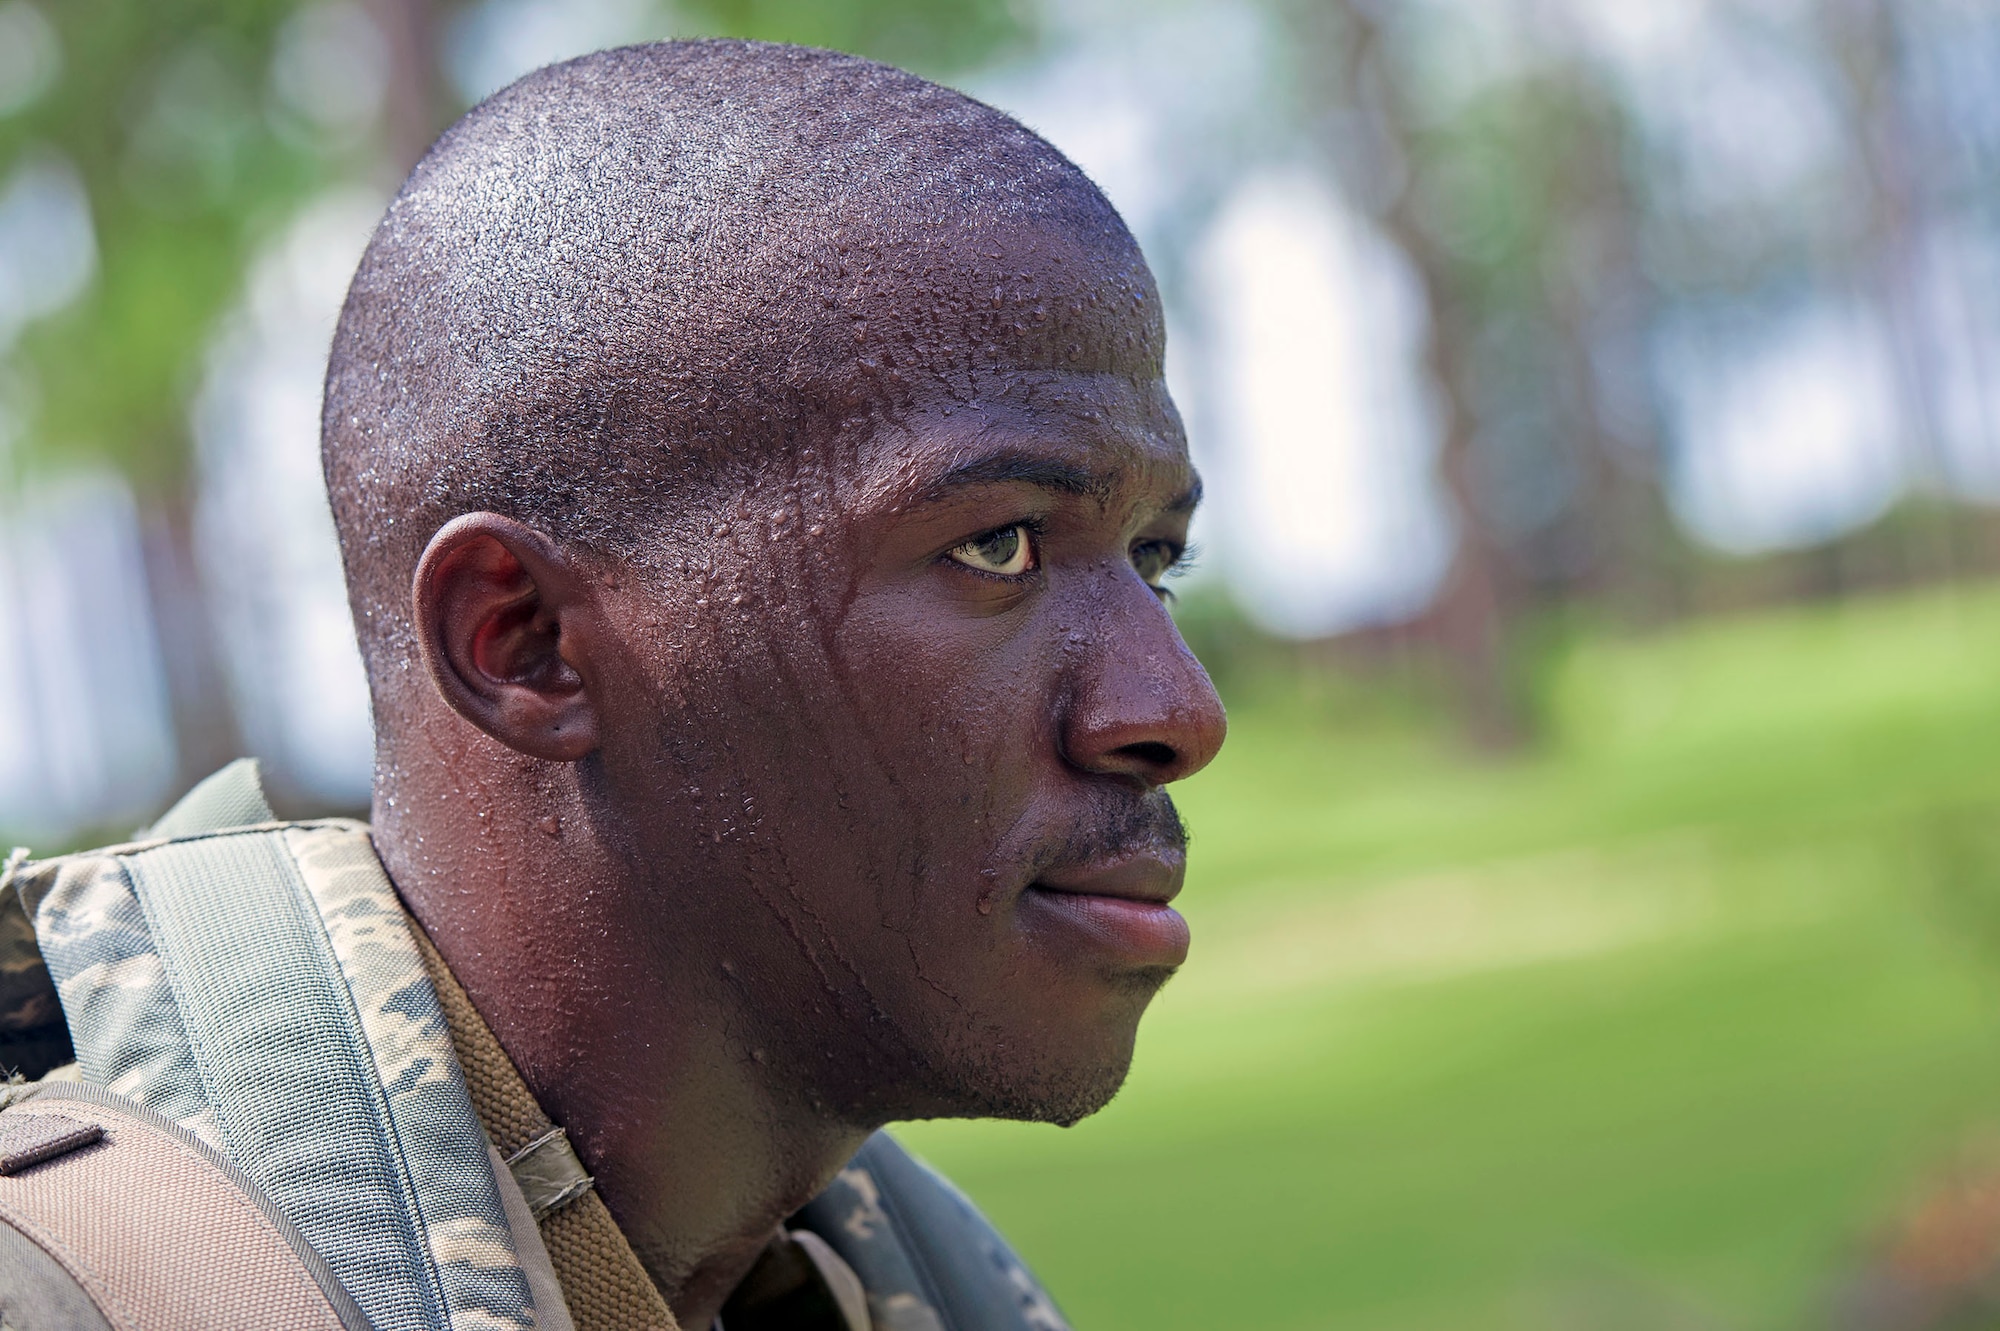 Sweat pours down the face of Airman 1st Class Brandun Spearman, 347th Operations Support Squadron aircrew flight equipment technician, during a Pre-Ranger Assessment Course, Aug. 26, 2018, at Moody Air Force Base, Ga. Moody’s 93d Air Ground Operations Wing hosted the three-day assessment which challenged approximately 20 Airmen from the 93d AGOW and 23d Wing on their physical fitness, land navigation skills, leadership qualities, water confidence and academic and tactical abilities under duress. The evaluation is designed to determine whether Airmen are ready to attend the Air Force Ranger Assessment Course held at Fort Bliss, Texas. (U.S. Air Force photo by Senior Airman Greg Nash)